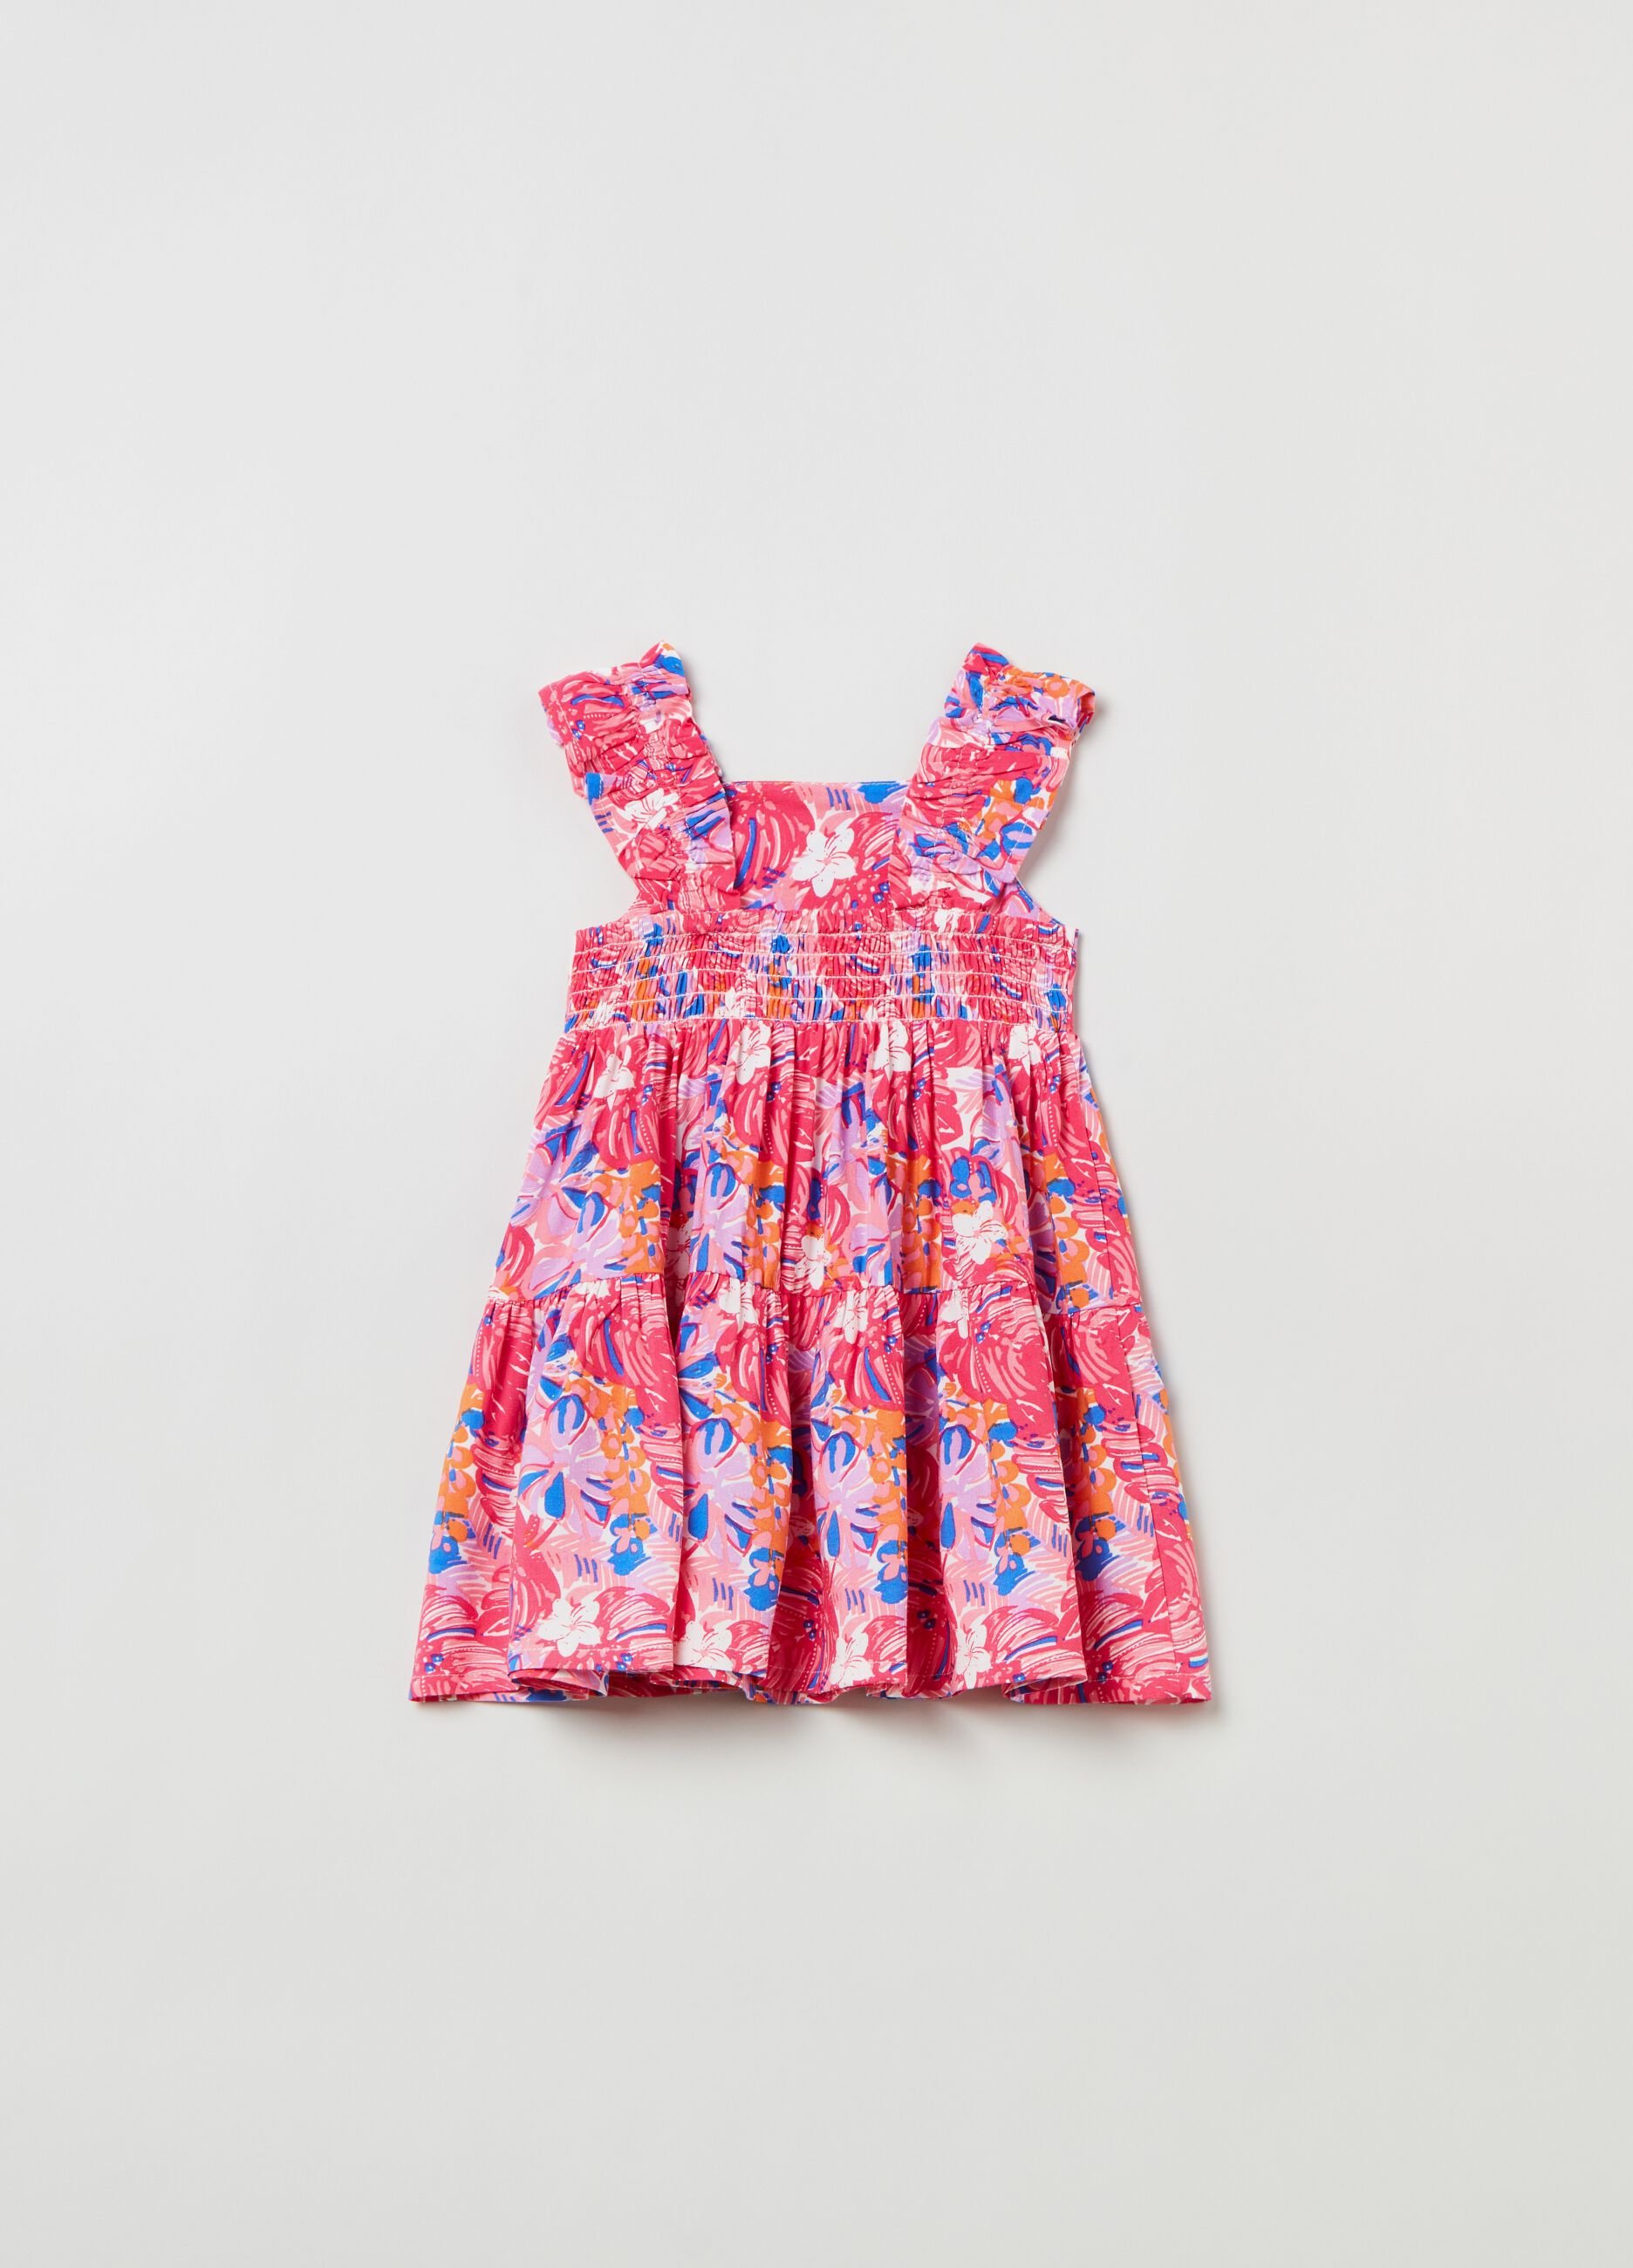 Tiered dress with floral print